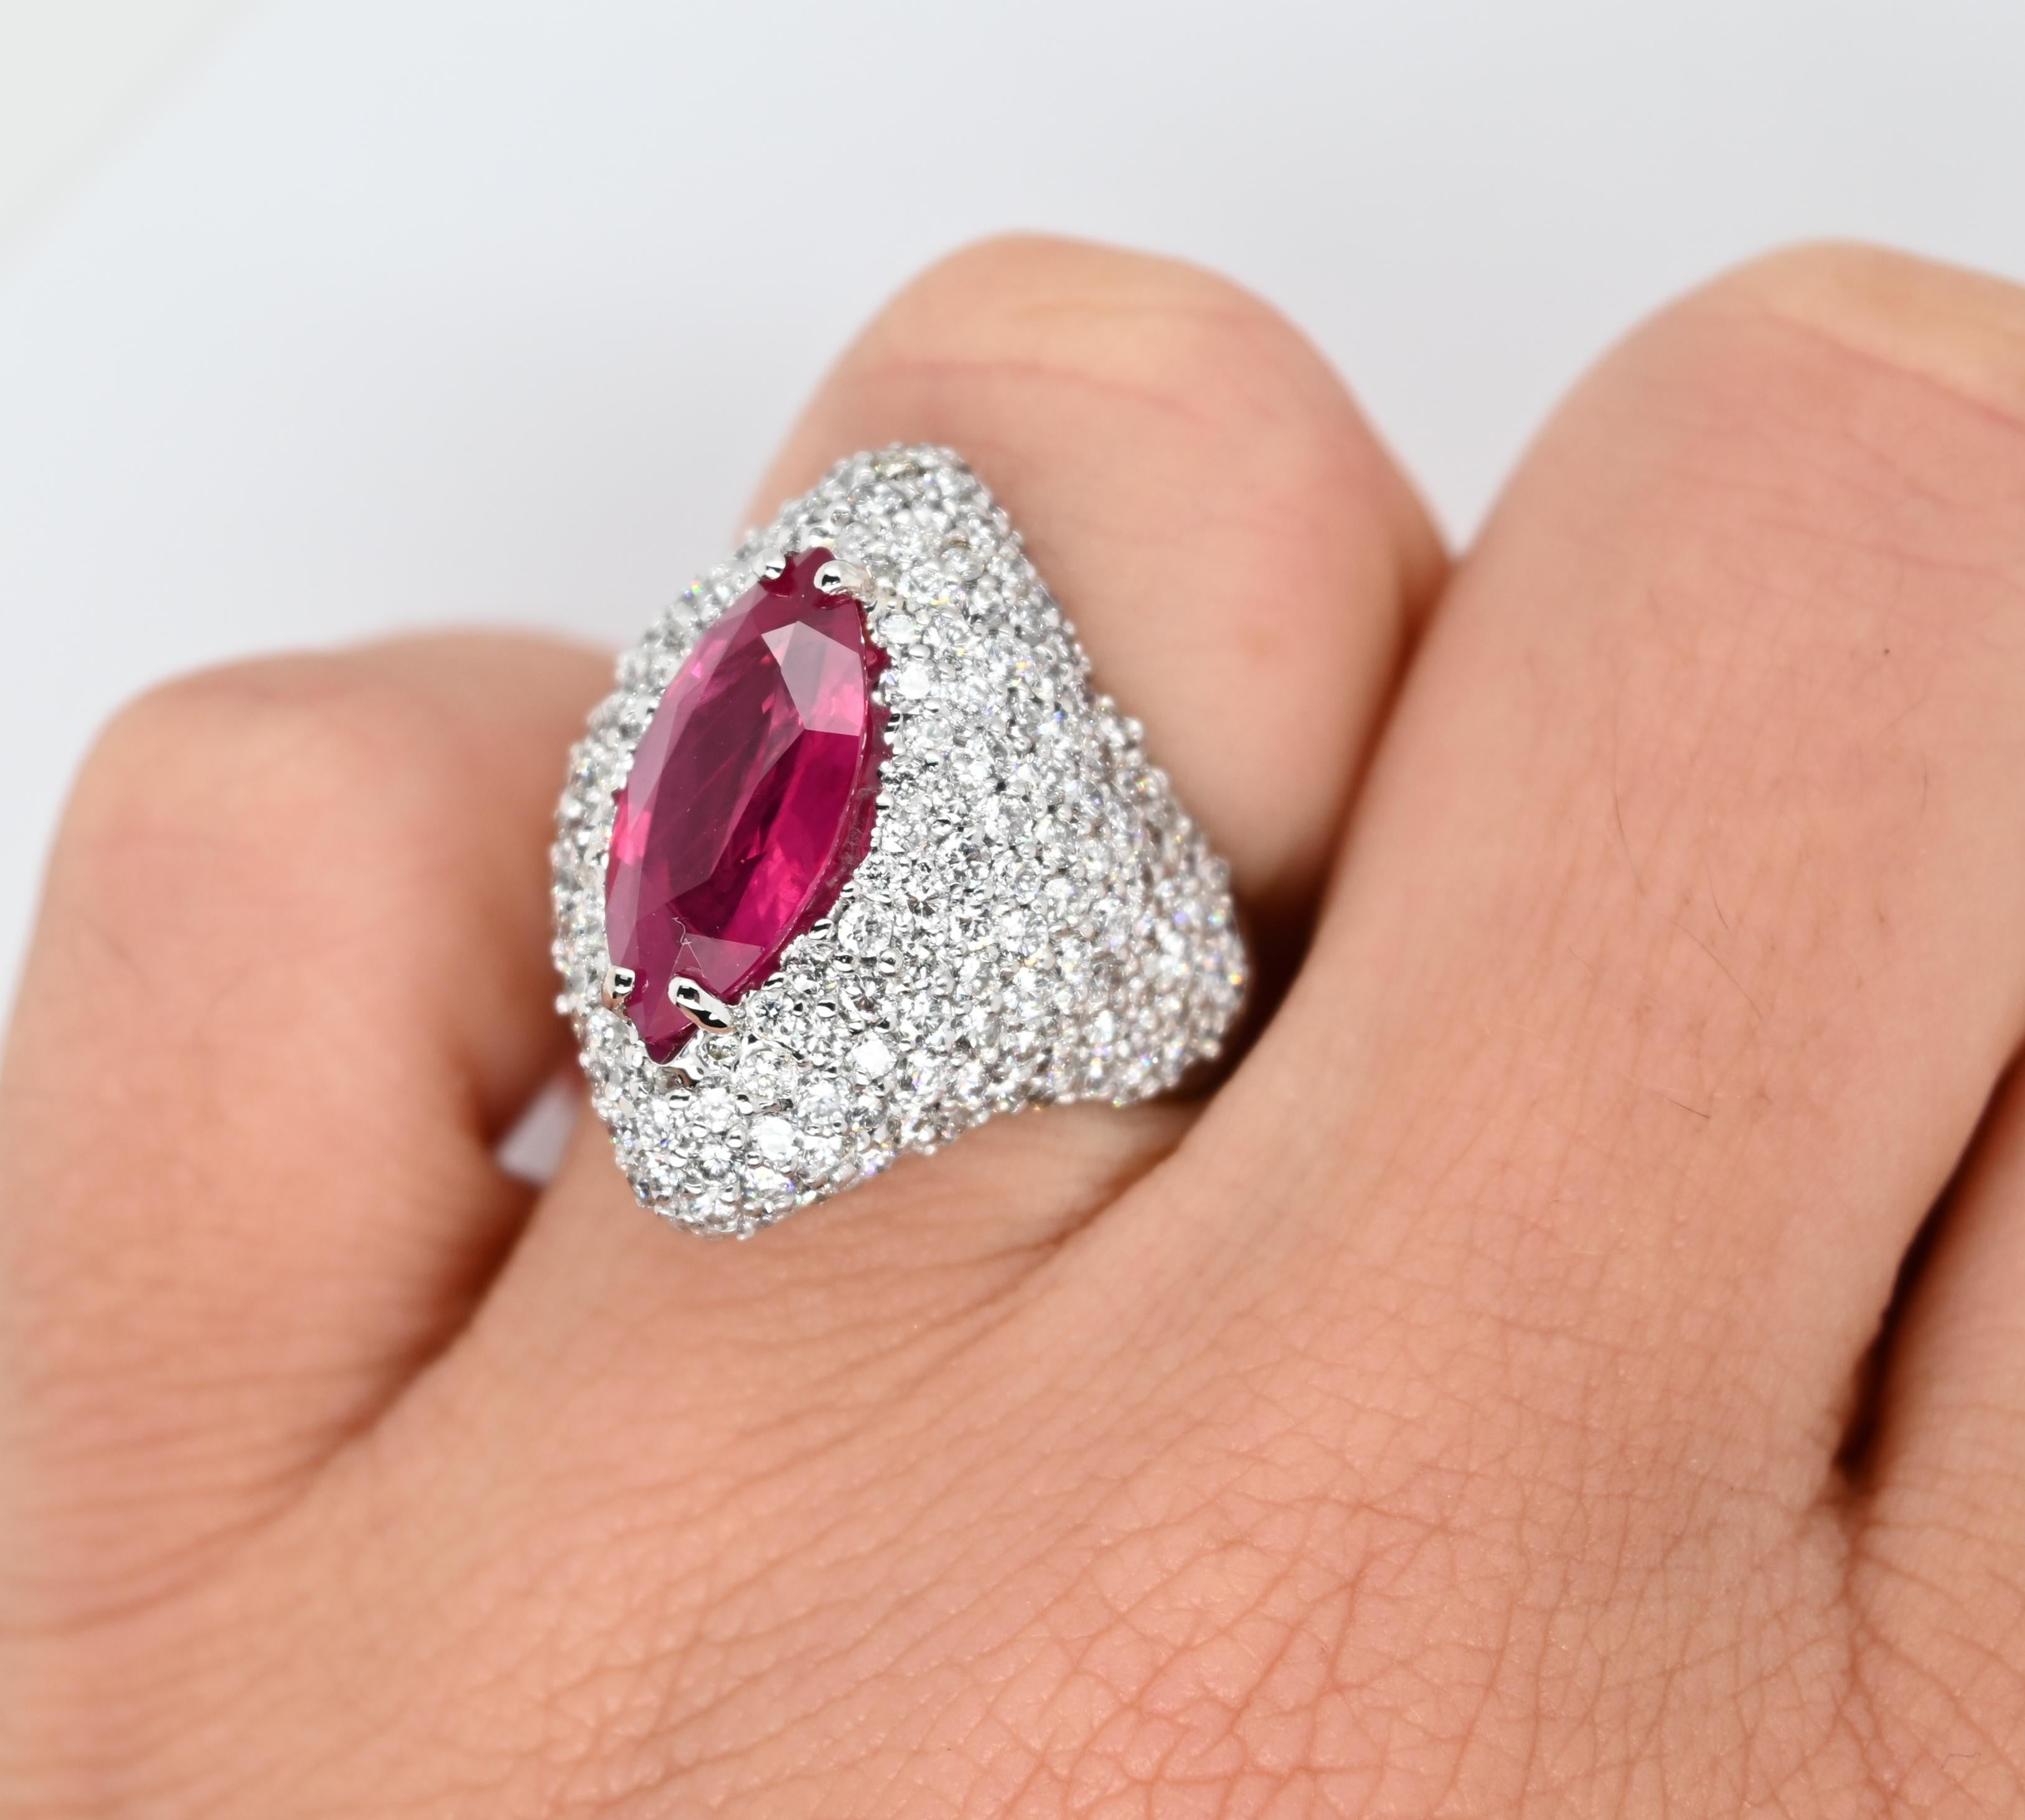 Beautiful cocktail ring features 3.74 carats of round white diamonds and 3.94 carats of burma ruby.